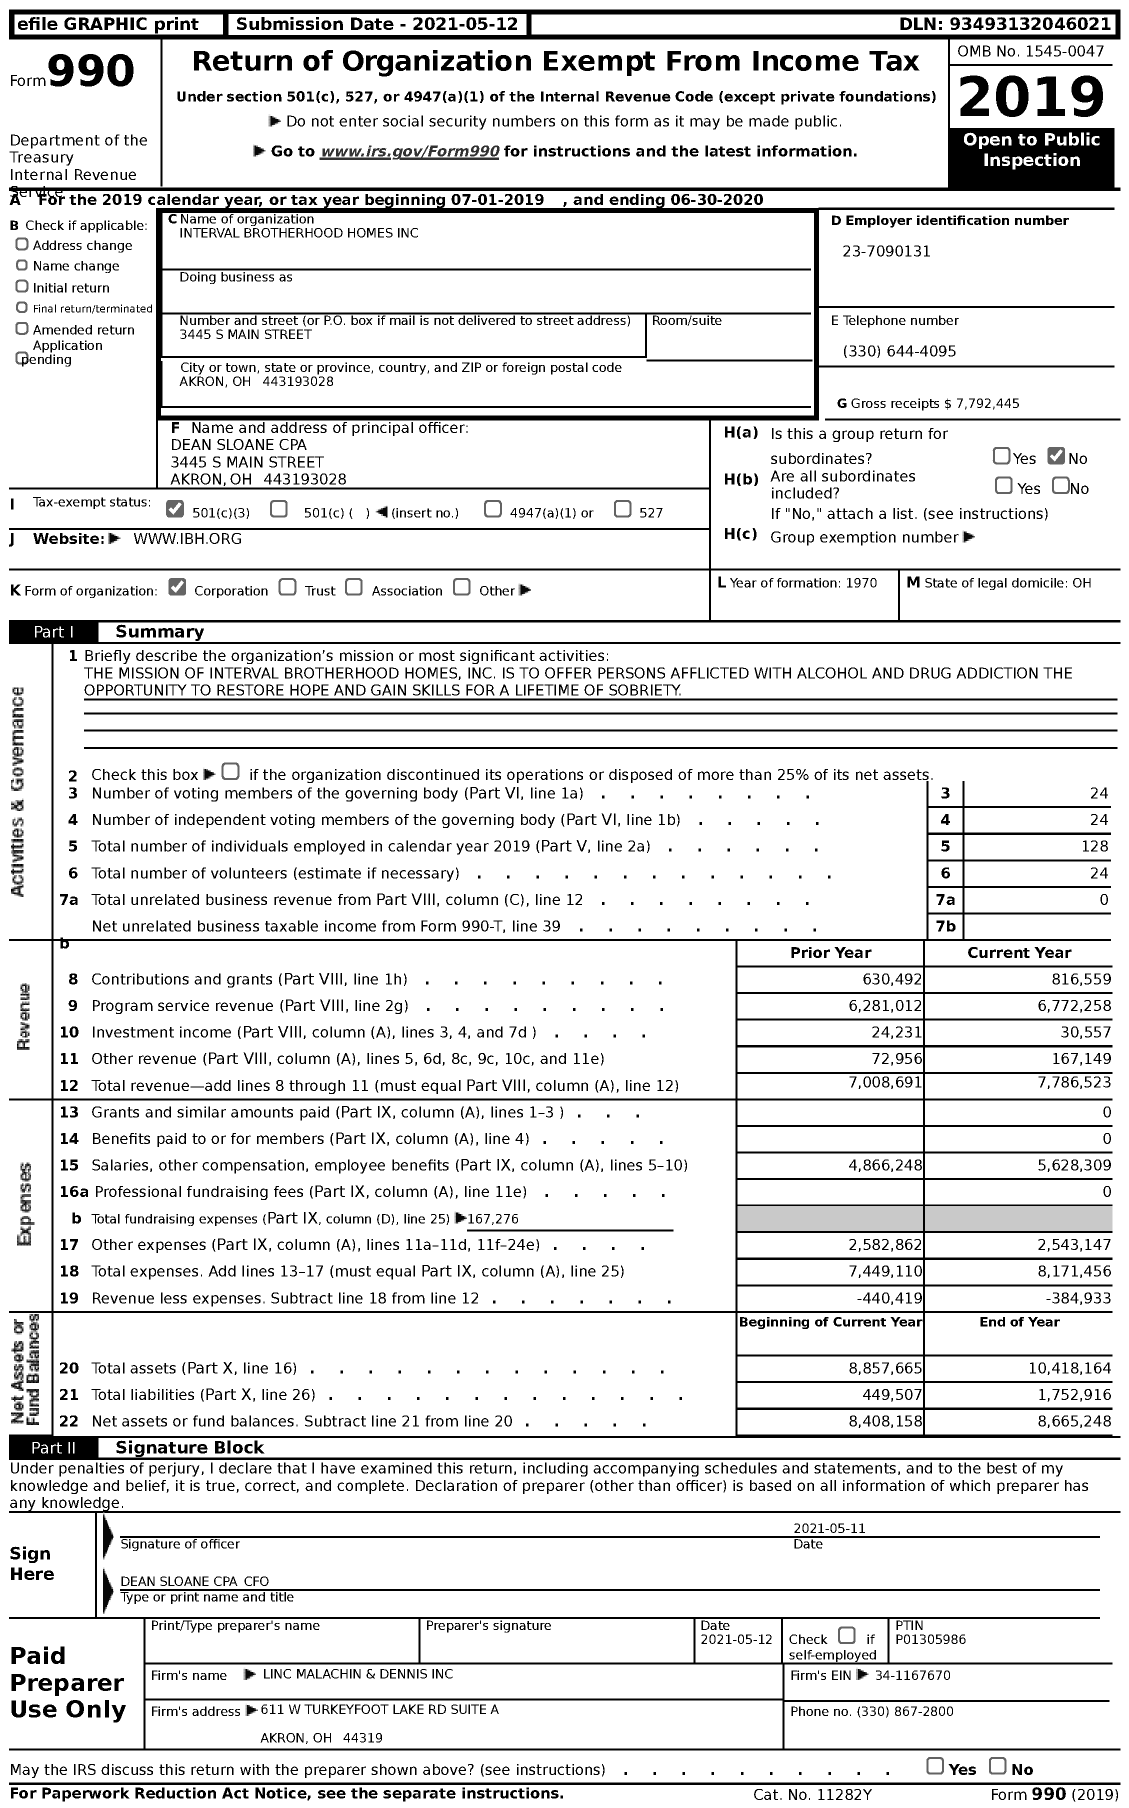 Image of first page of 2019 Form 990 for Ibh Addiction Recovery (IBH)